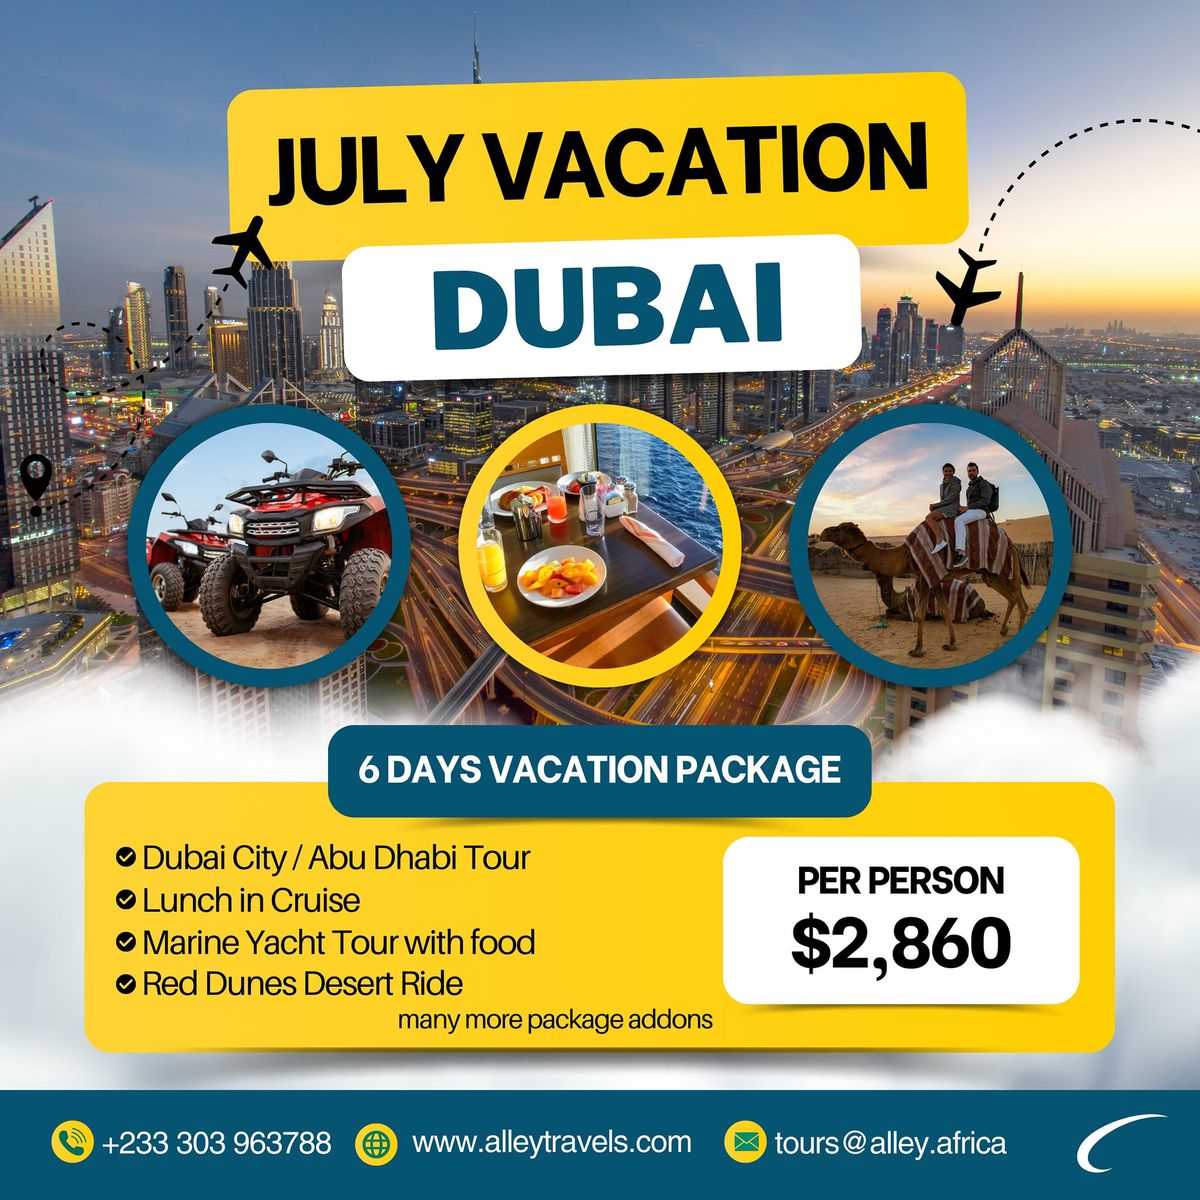 Explore Dubai with Alley Travels